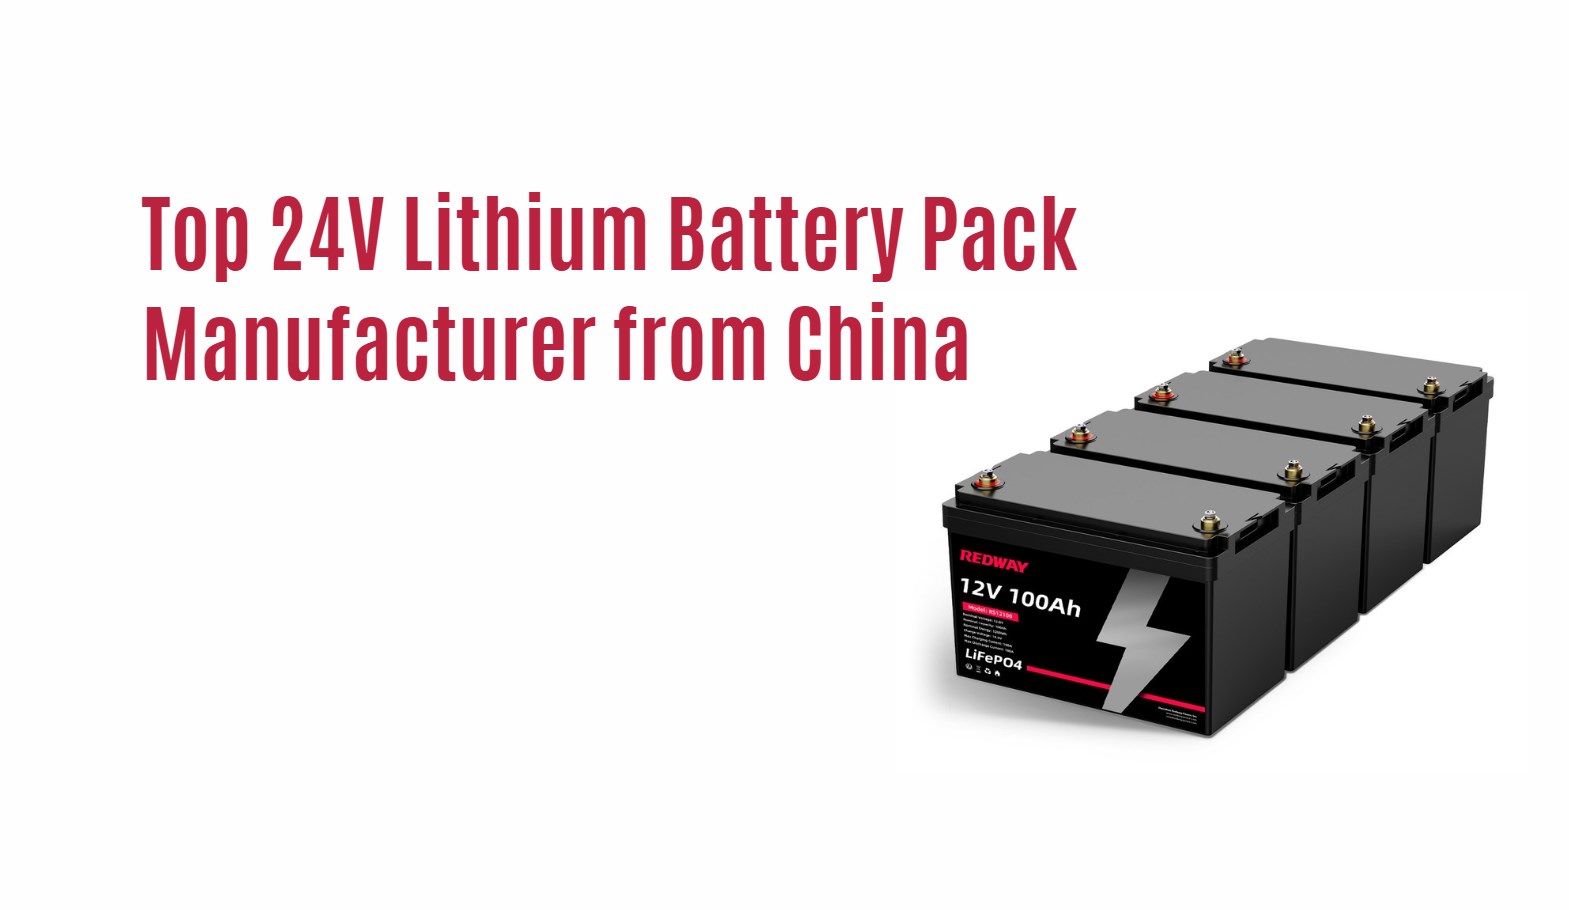 Top 24V Lithium Battery Pack Manufacturer from China